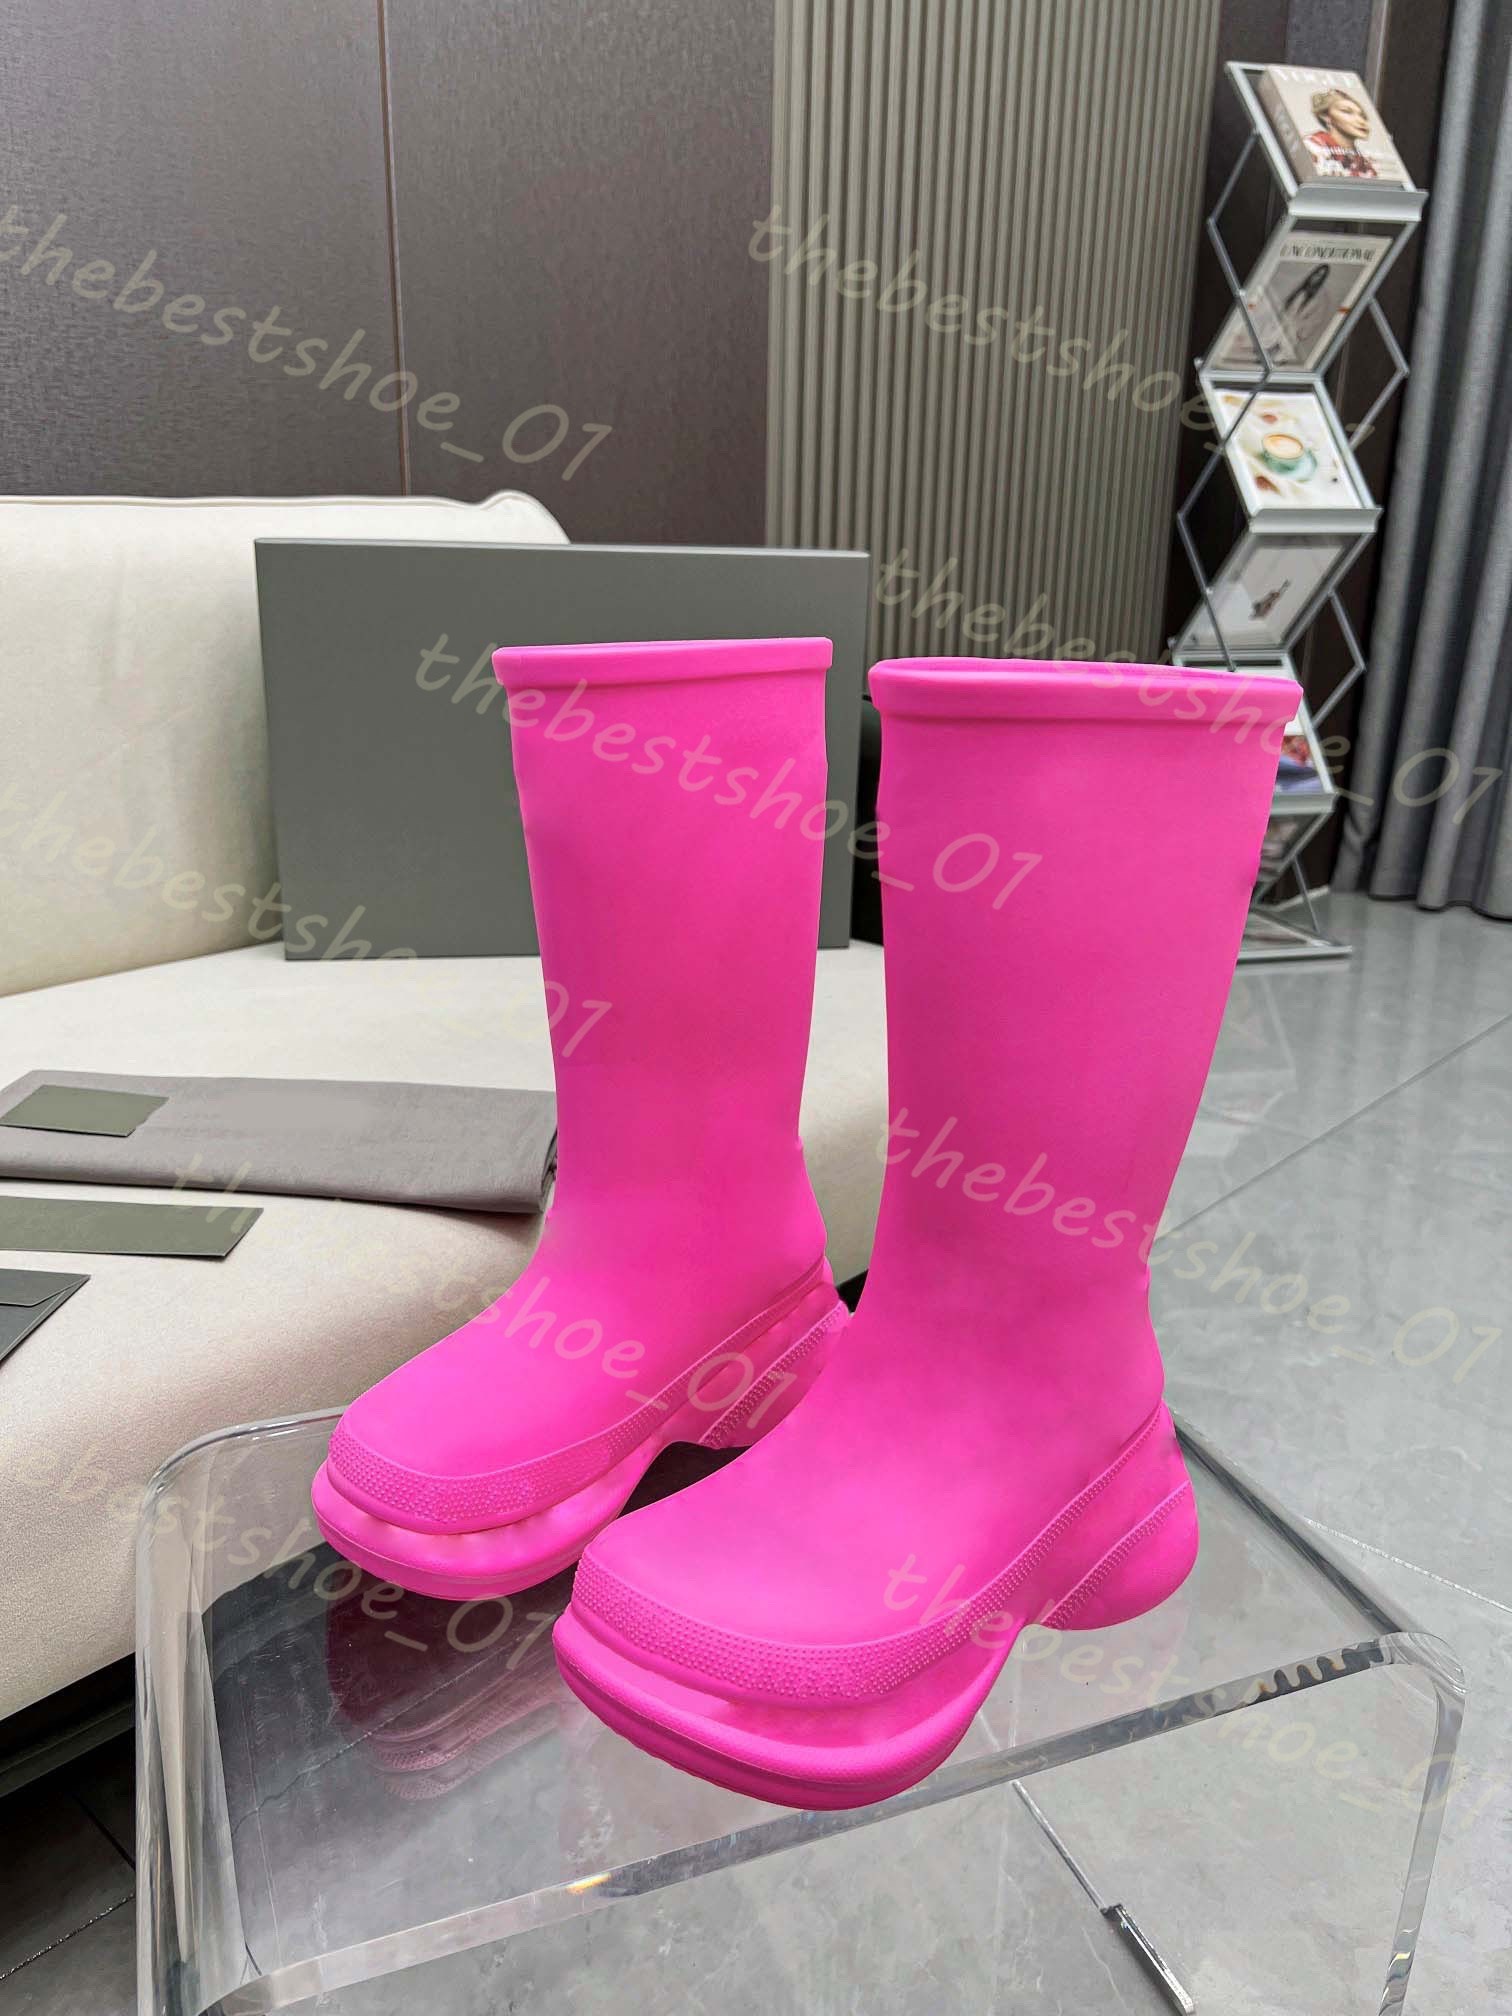 Boots Boots Fall Winter Winter Women's Rain Boots Men's Coll Color Rubber Rubber Roofbroom Walking Platform Platfor